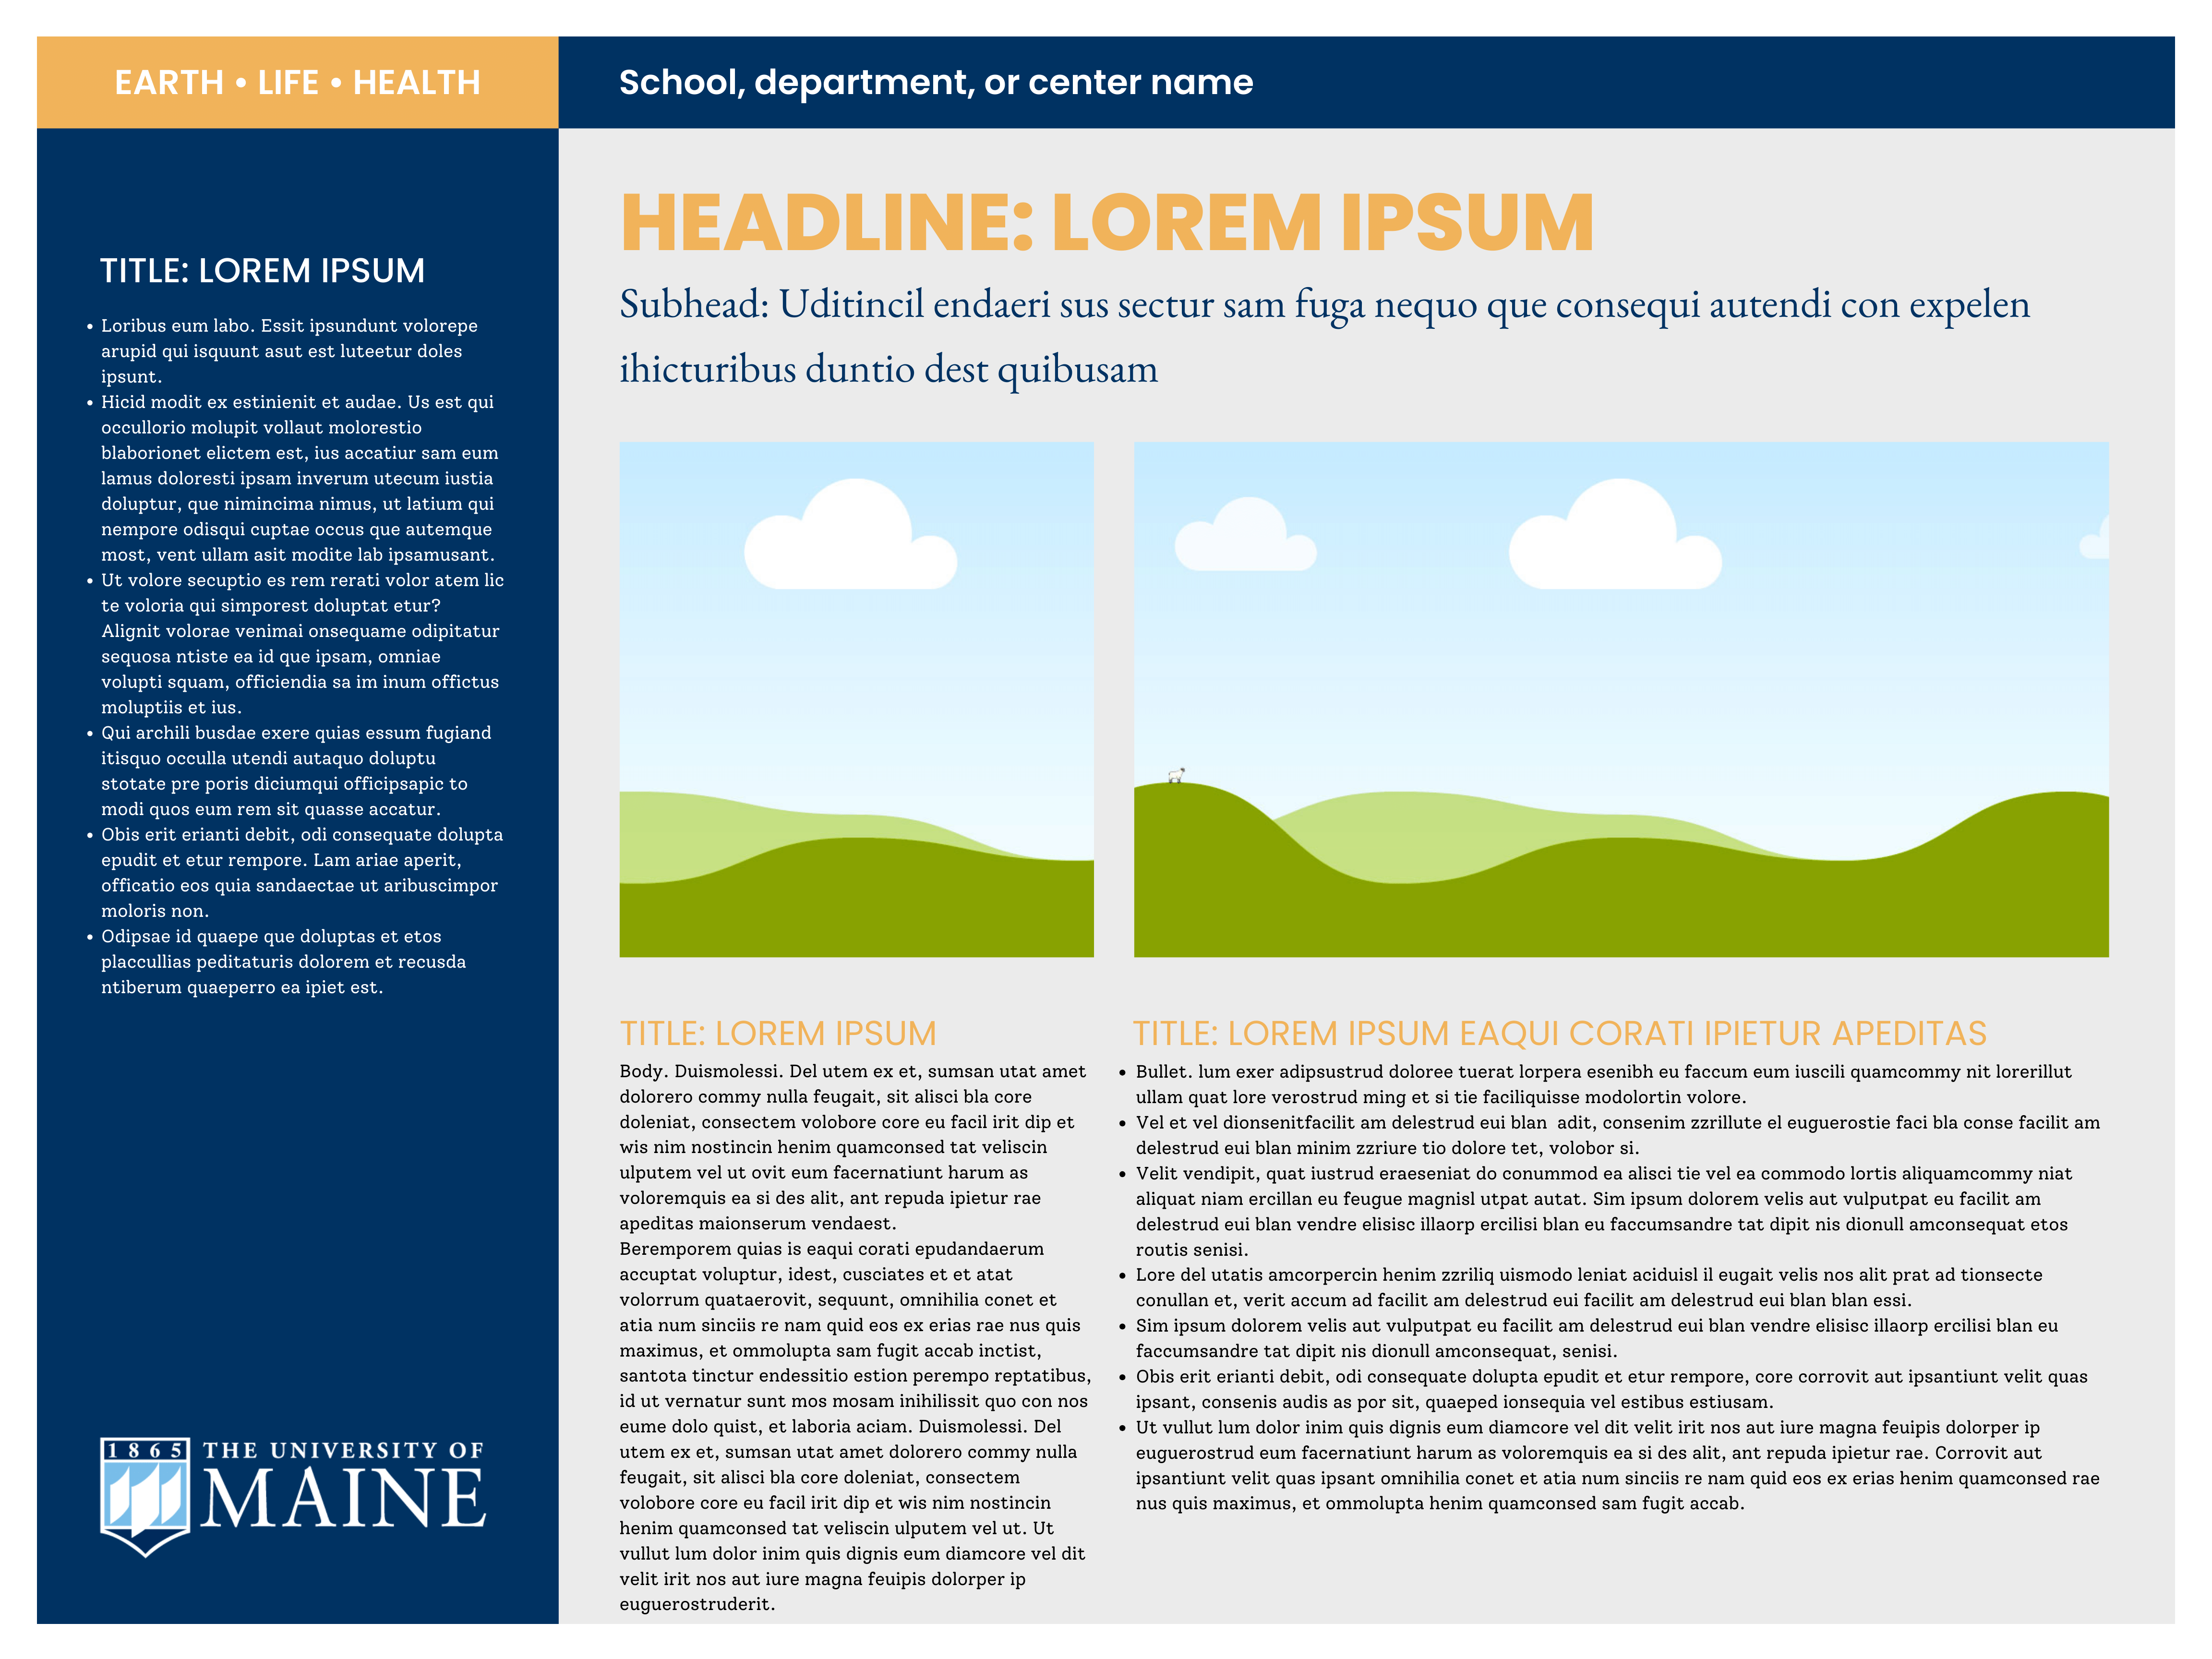 A research poster template with three columns and in a blue and gold color palette.